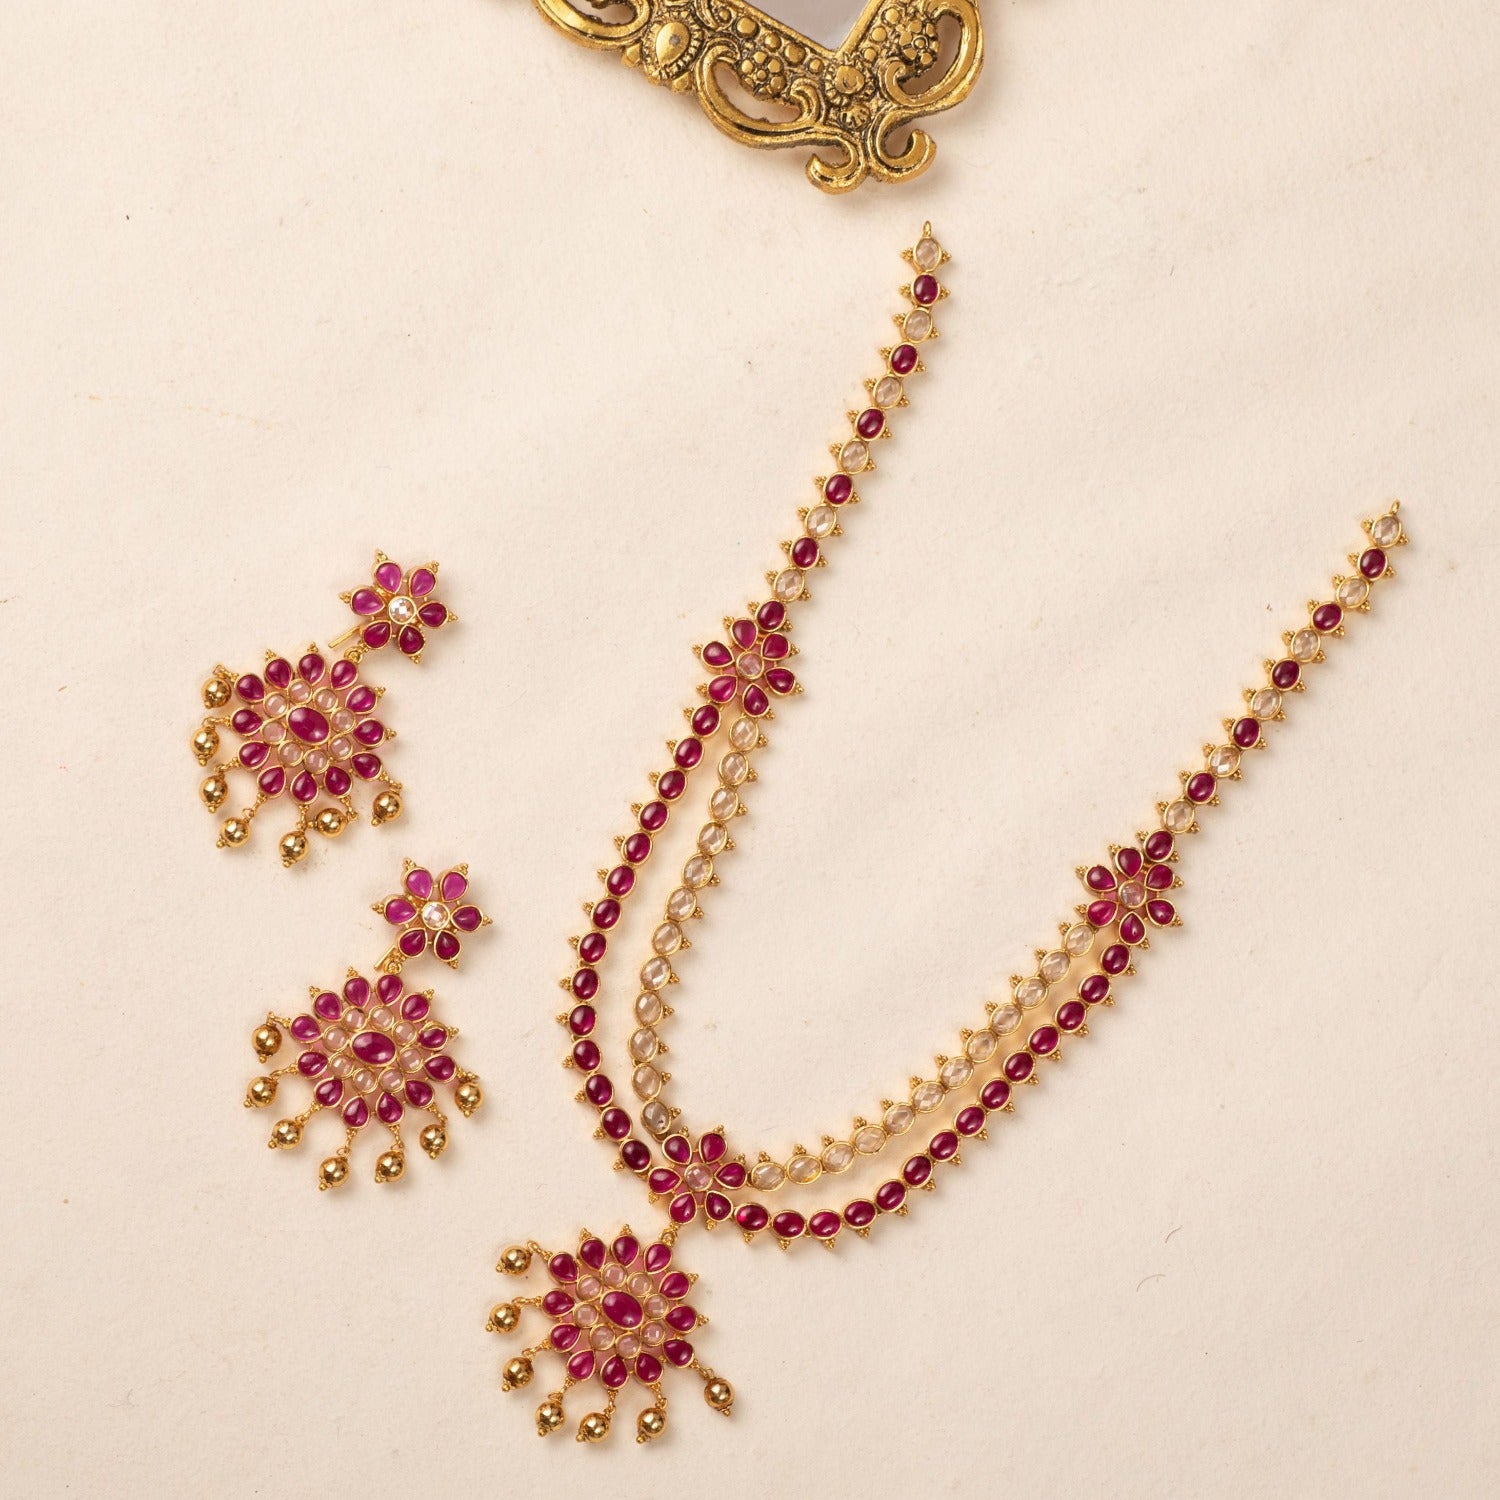 22ct Gold Two Tone Ball Drop Necklace Set – Roop Darshan